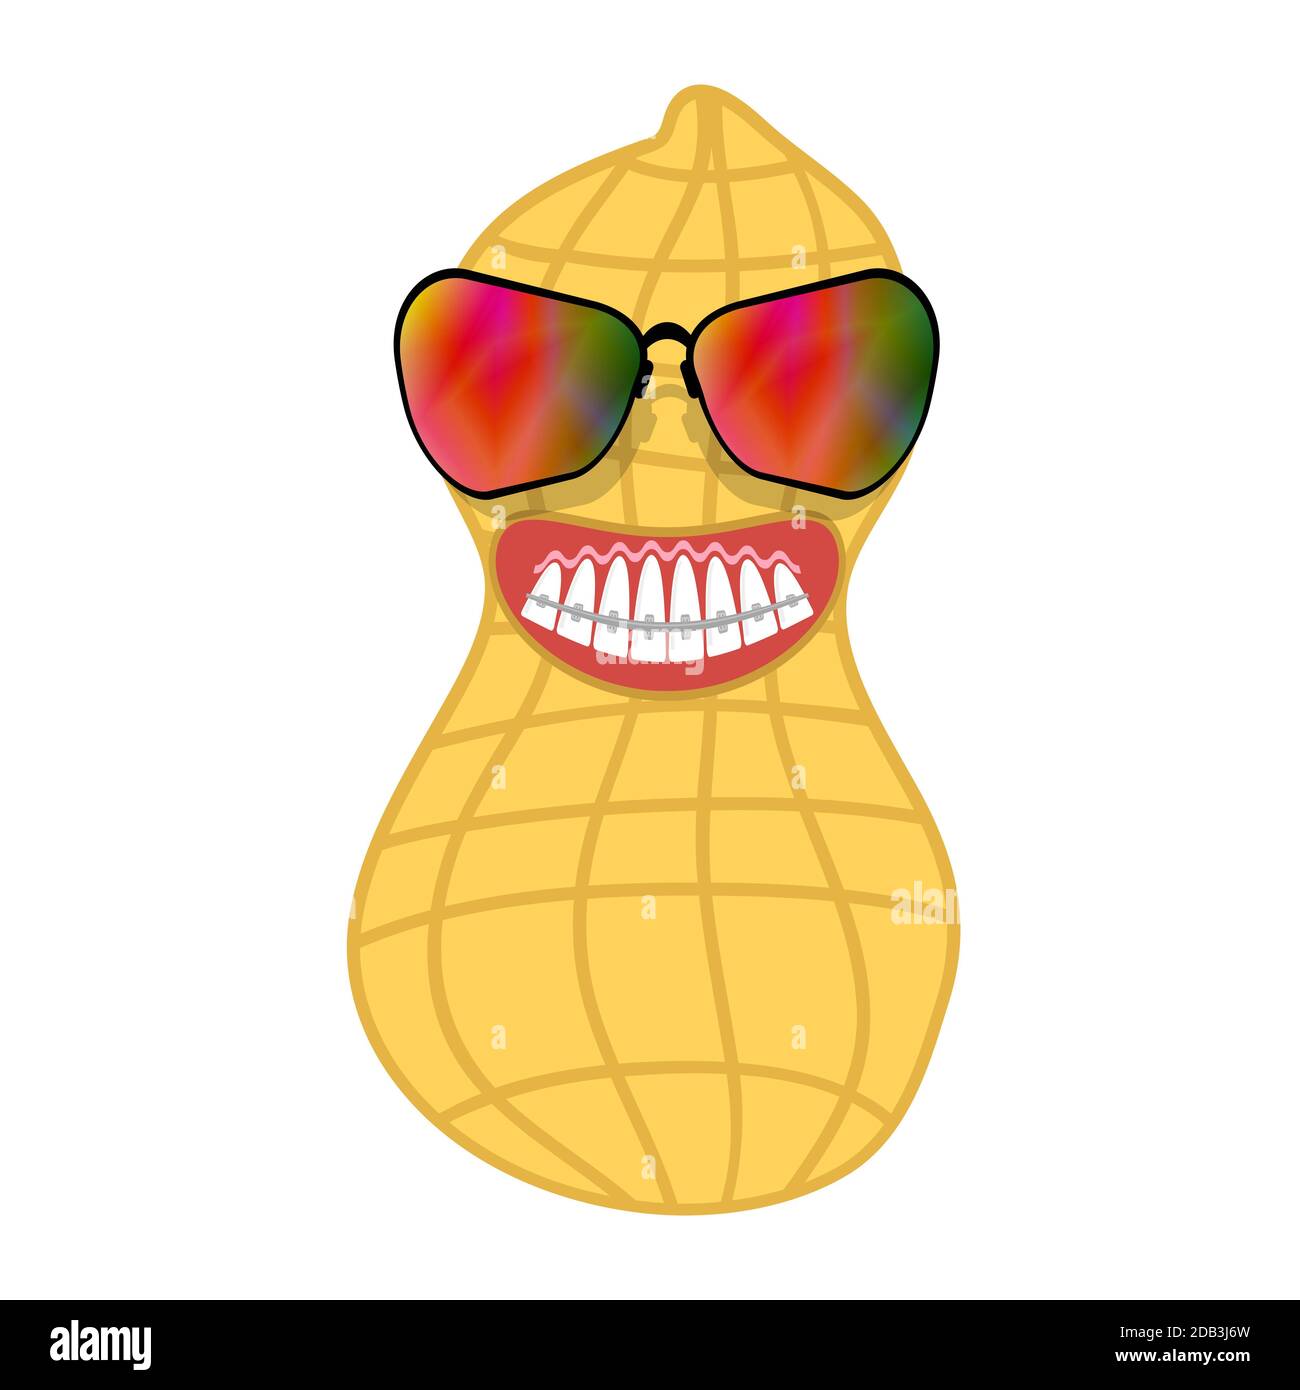 Cartoon Peanut Icon with Sunglasses and Braces Teeth Isolated on White Background. Medical Braces Teeth. Dental Care Background. Orthodontic Treatment Stock Photo